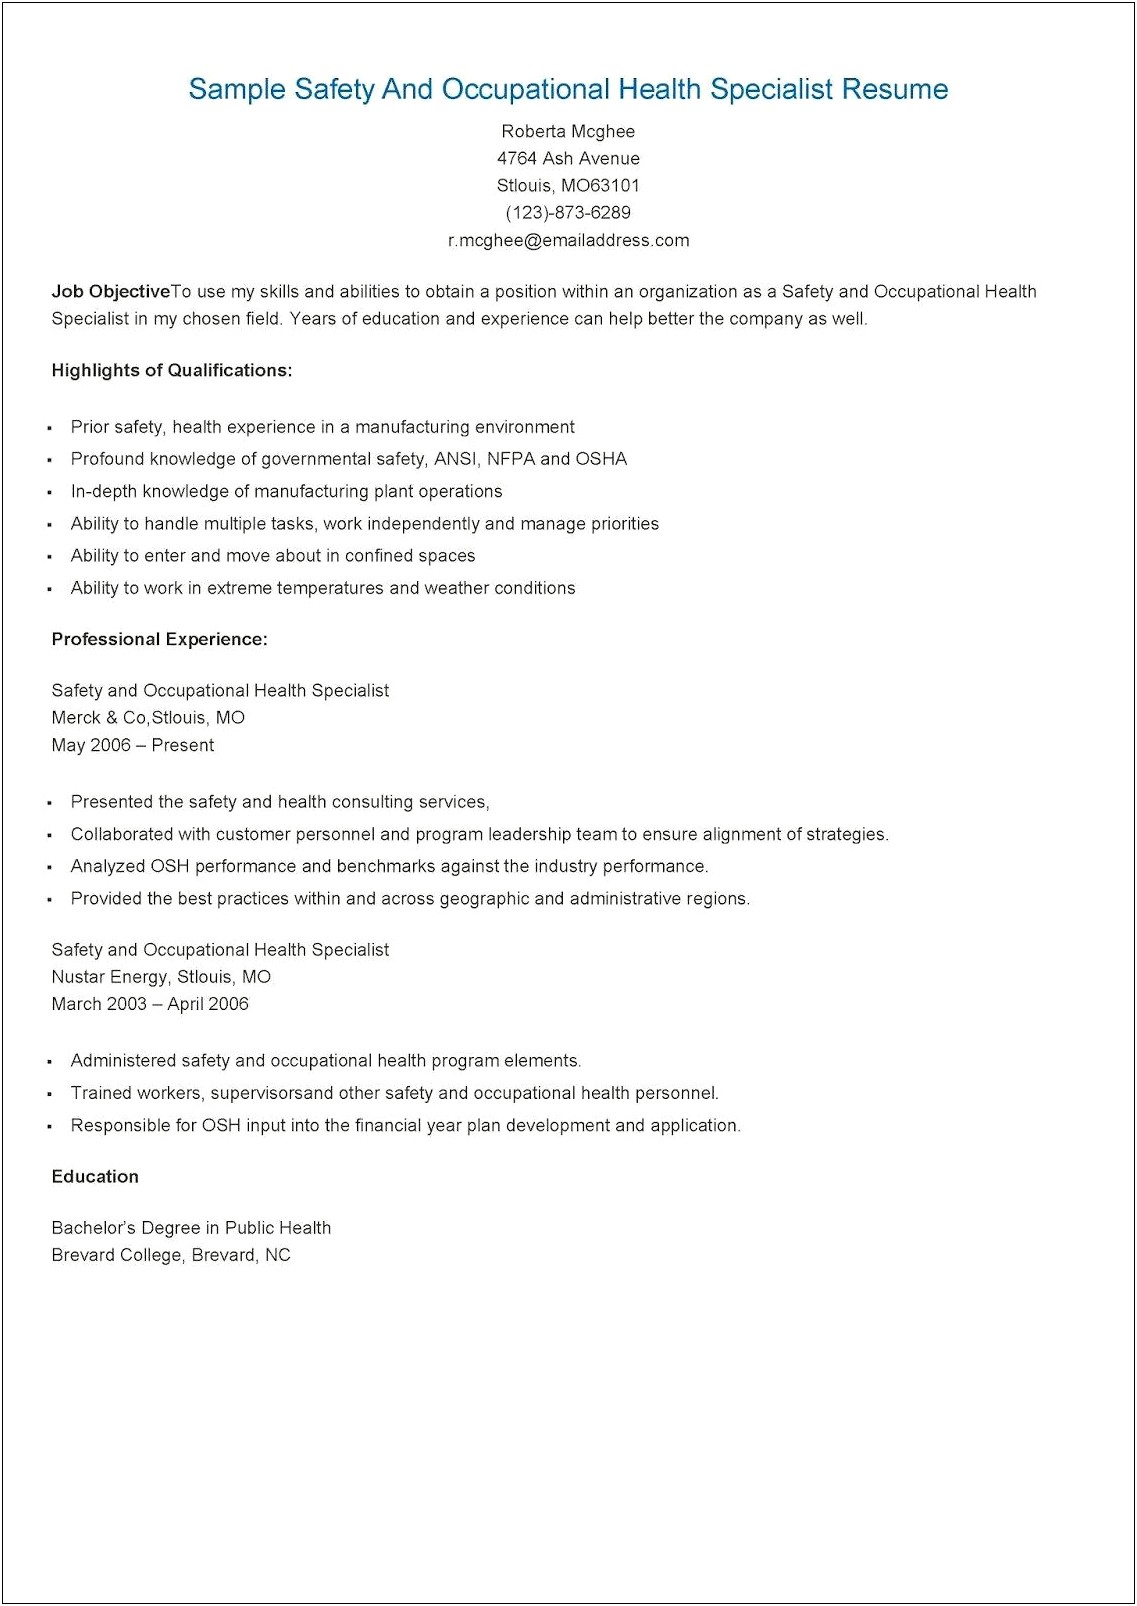 Resume Writers On Environmenttal And Safety Jobs